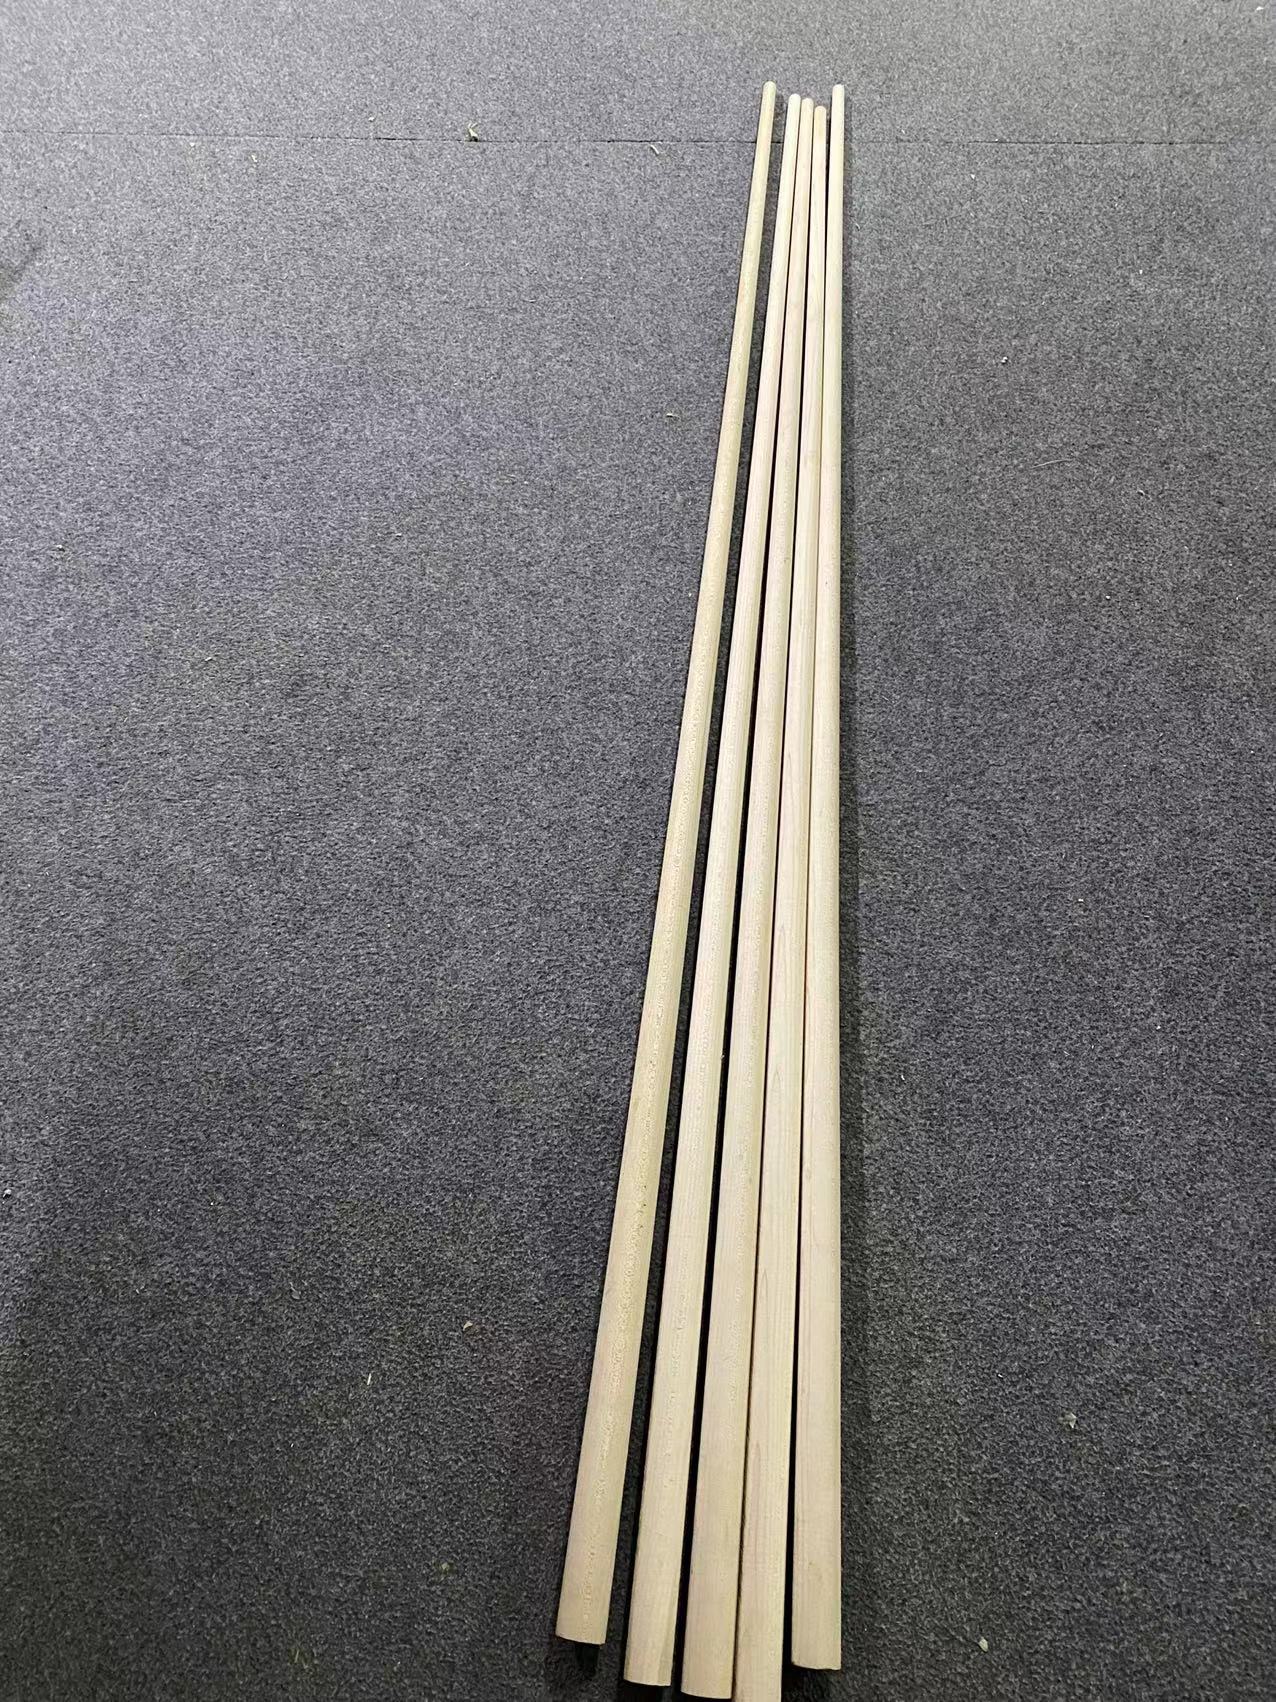 5 pcs canadian aaa grade selected maple shafts blank 1.48~1.5 m